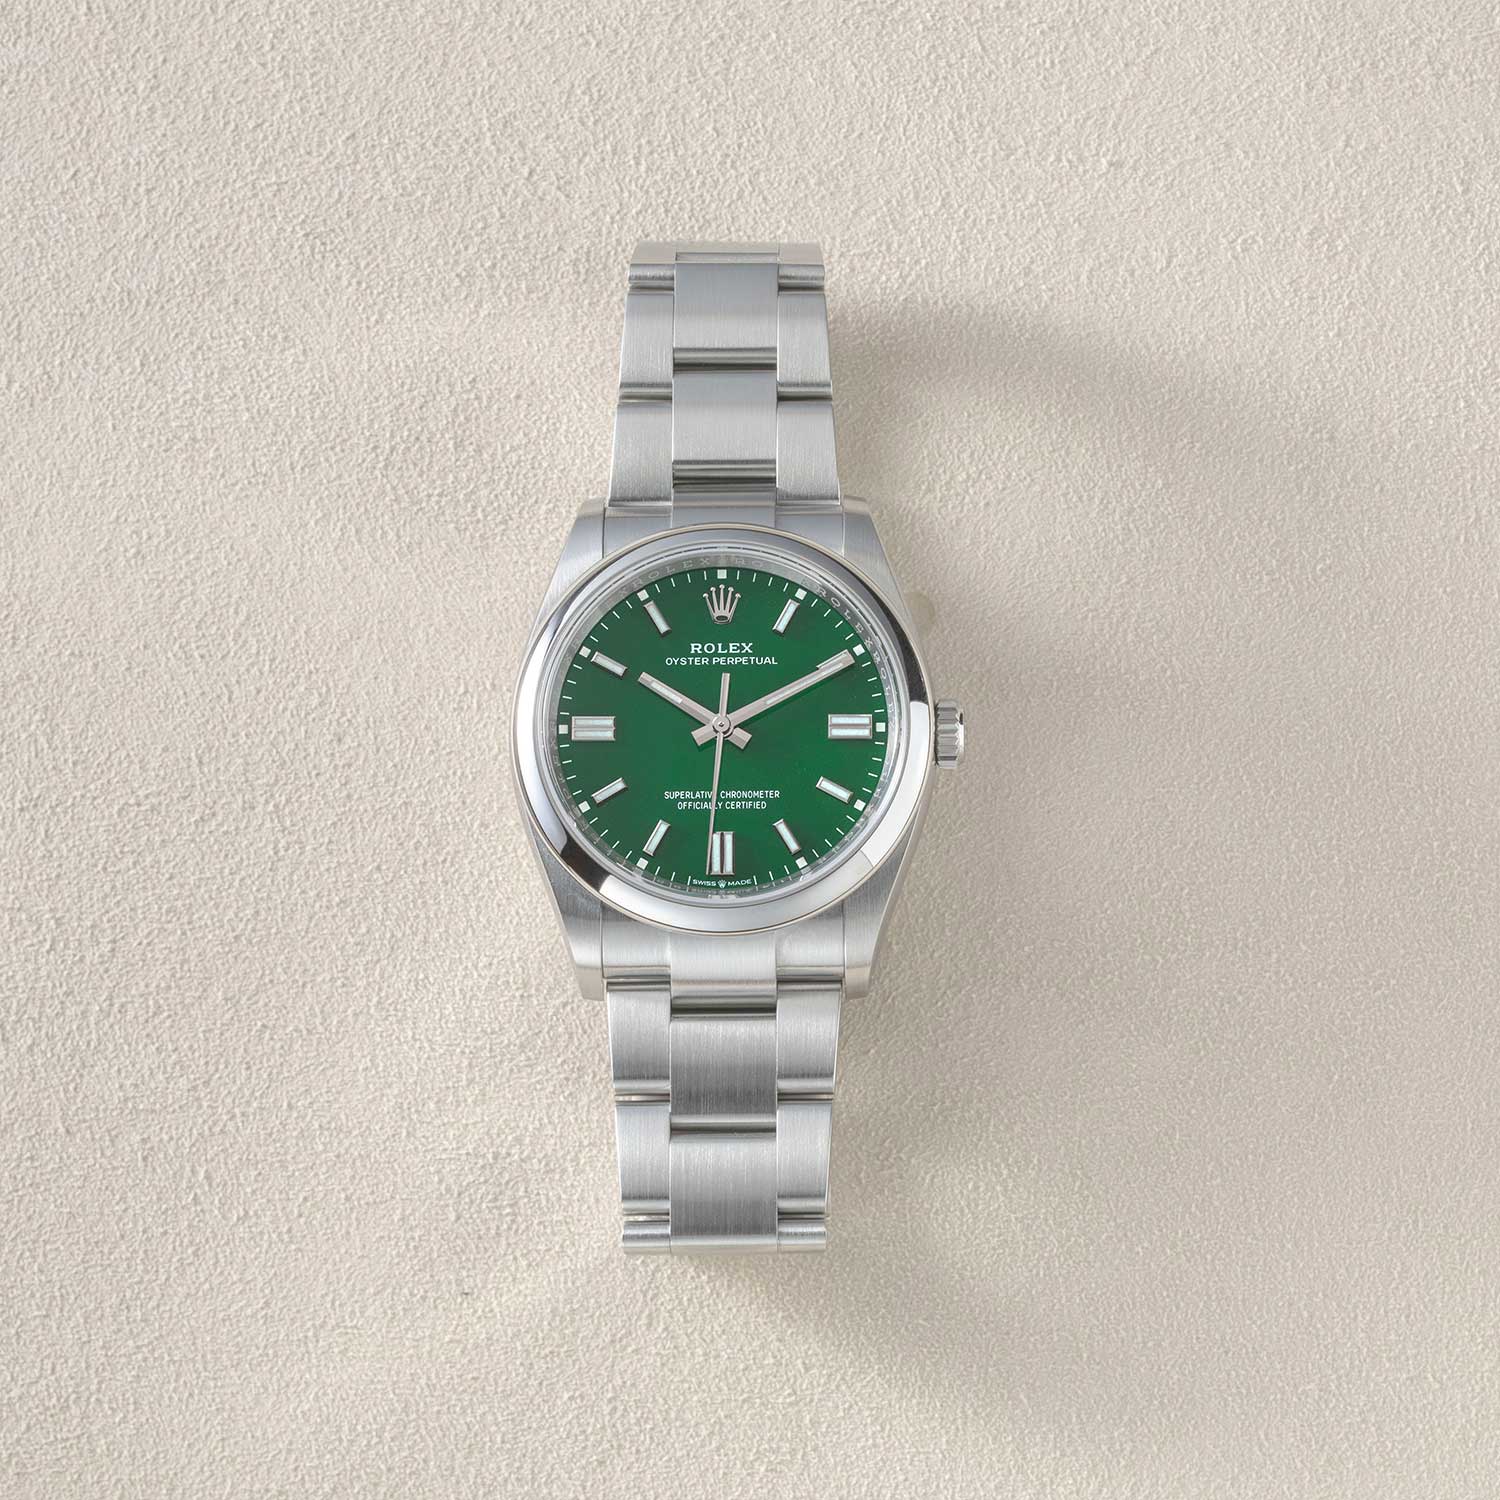 The 36mm 2020 Rolex Oyster Perpetual seen here with the green dial (©Revolution)